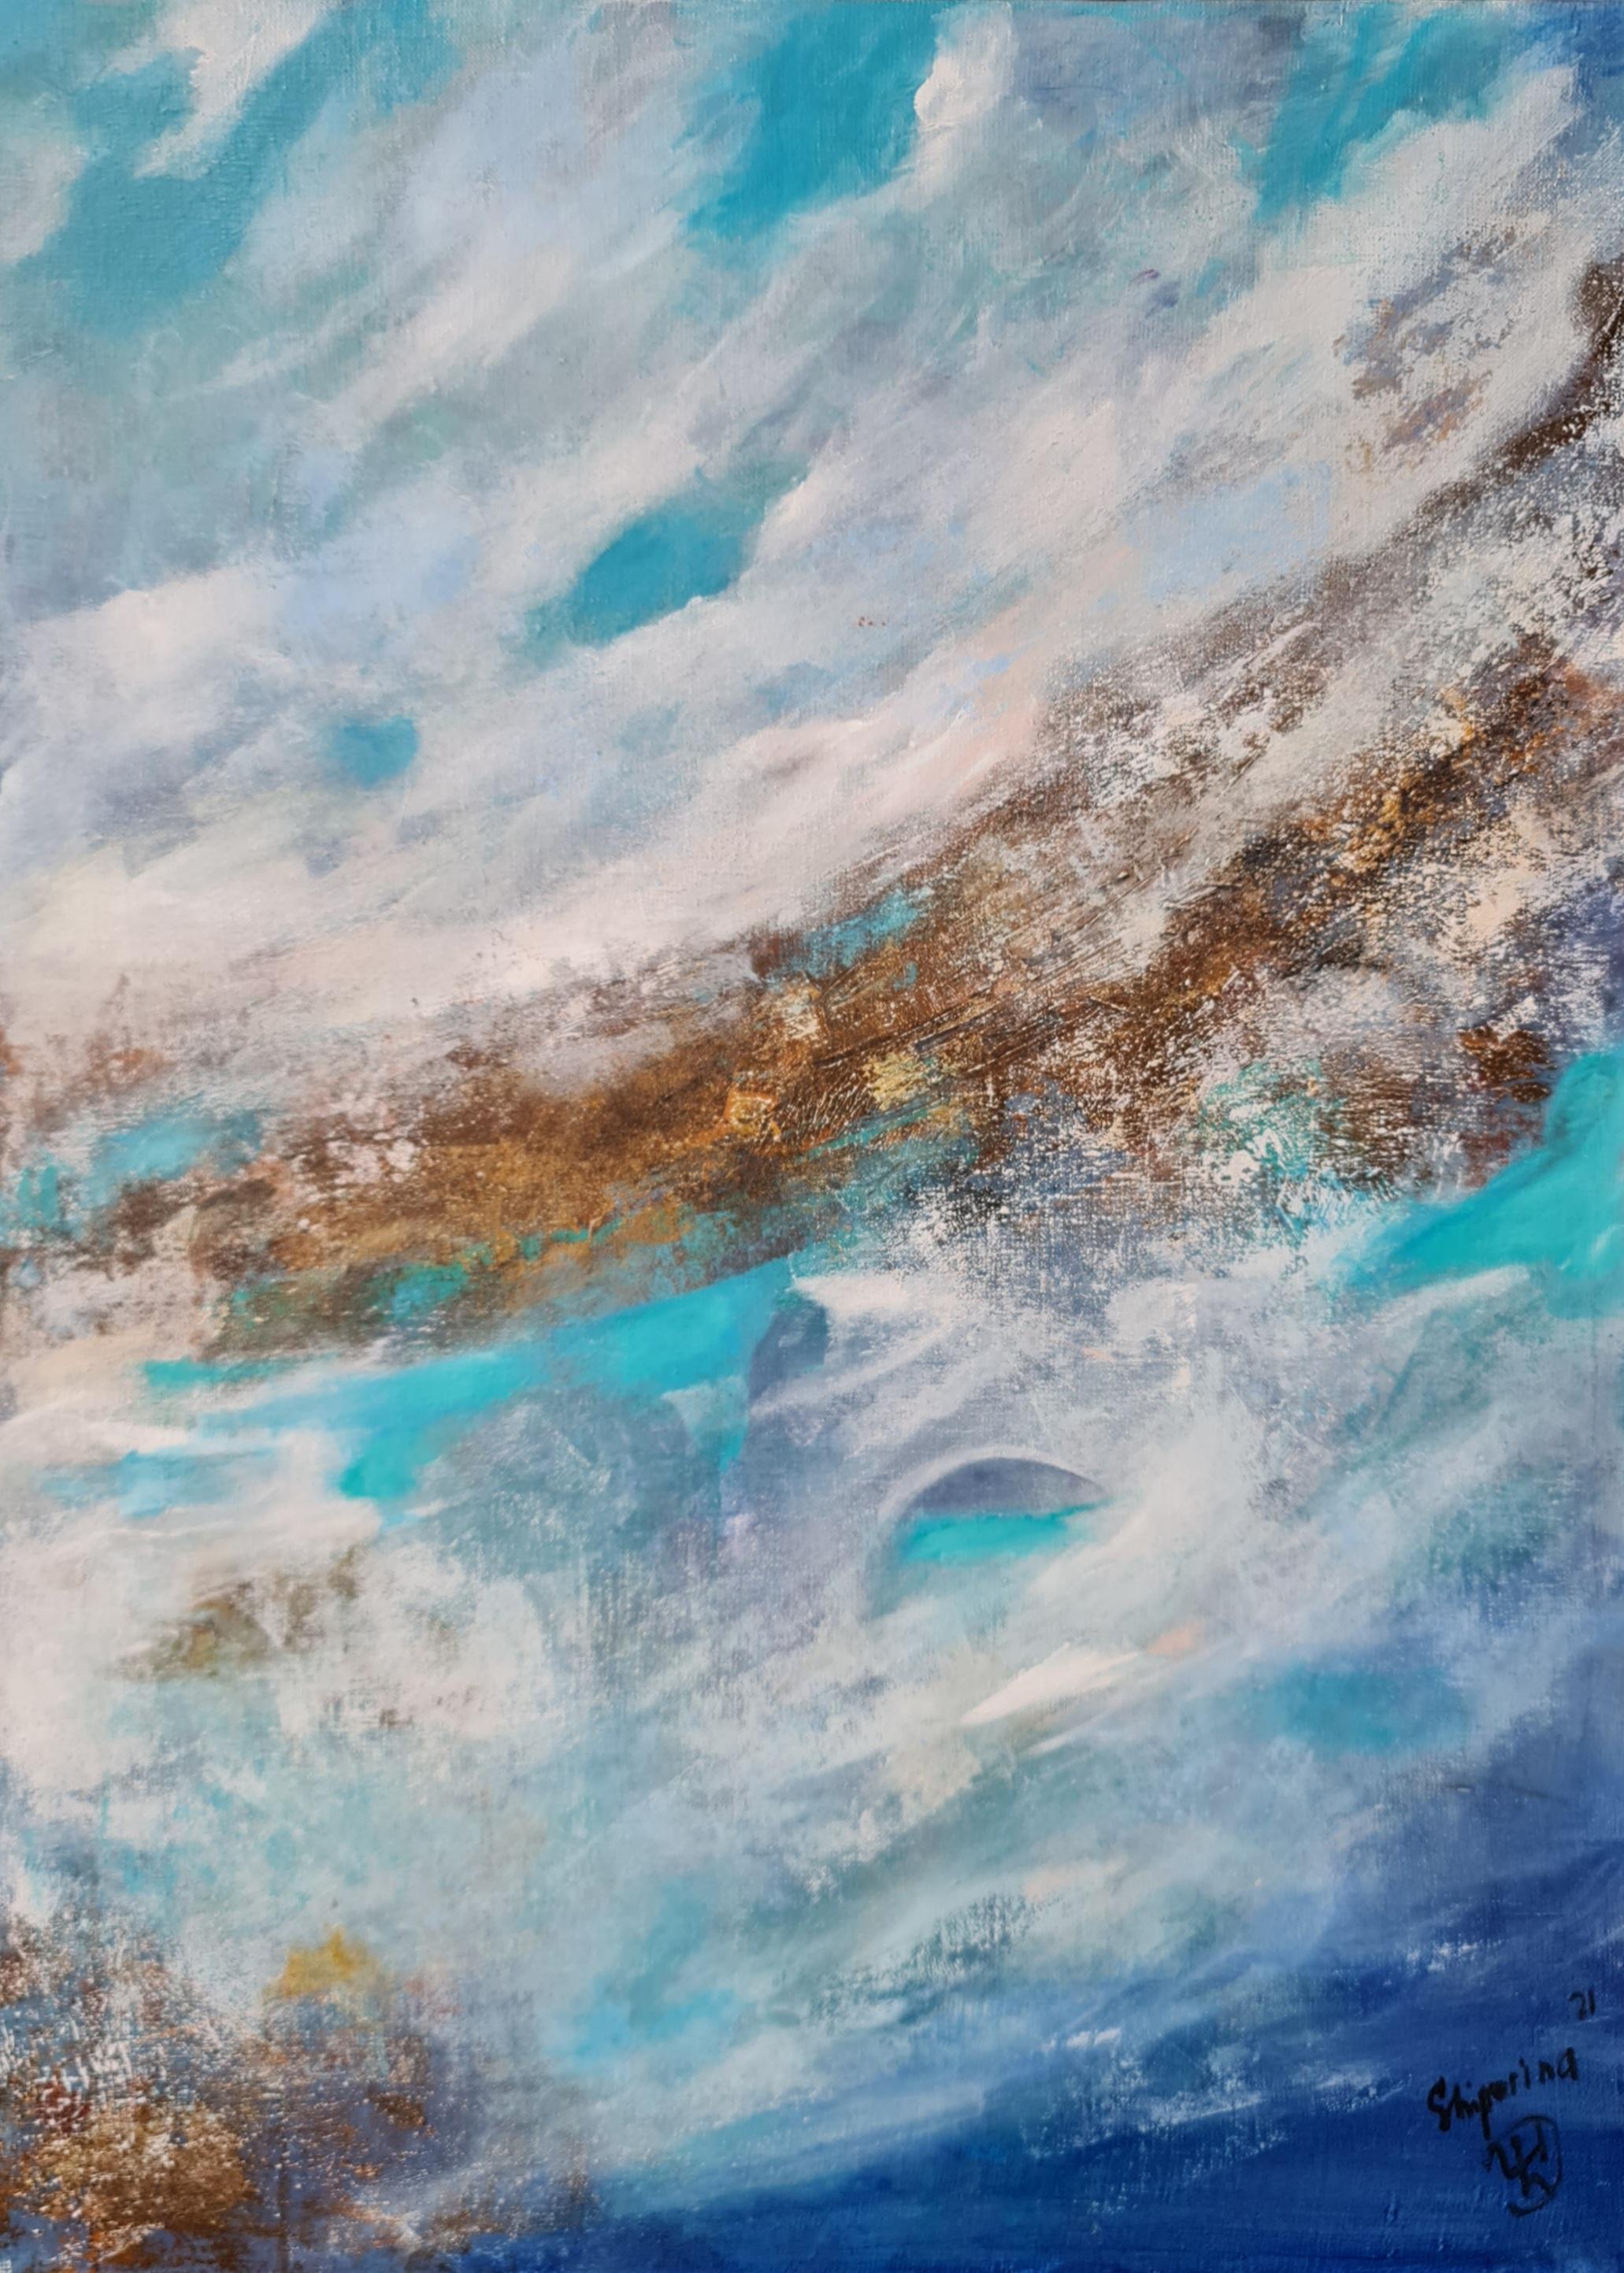 Sky sea / abstraction sea Modern abstract painting on canvas by Natalia Shiporin